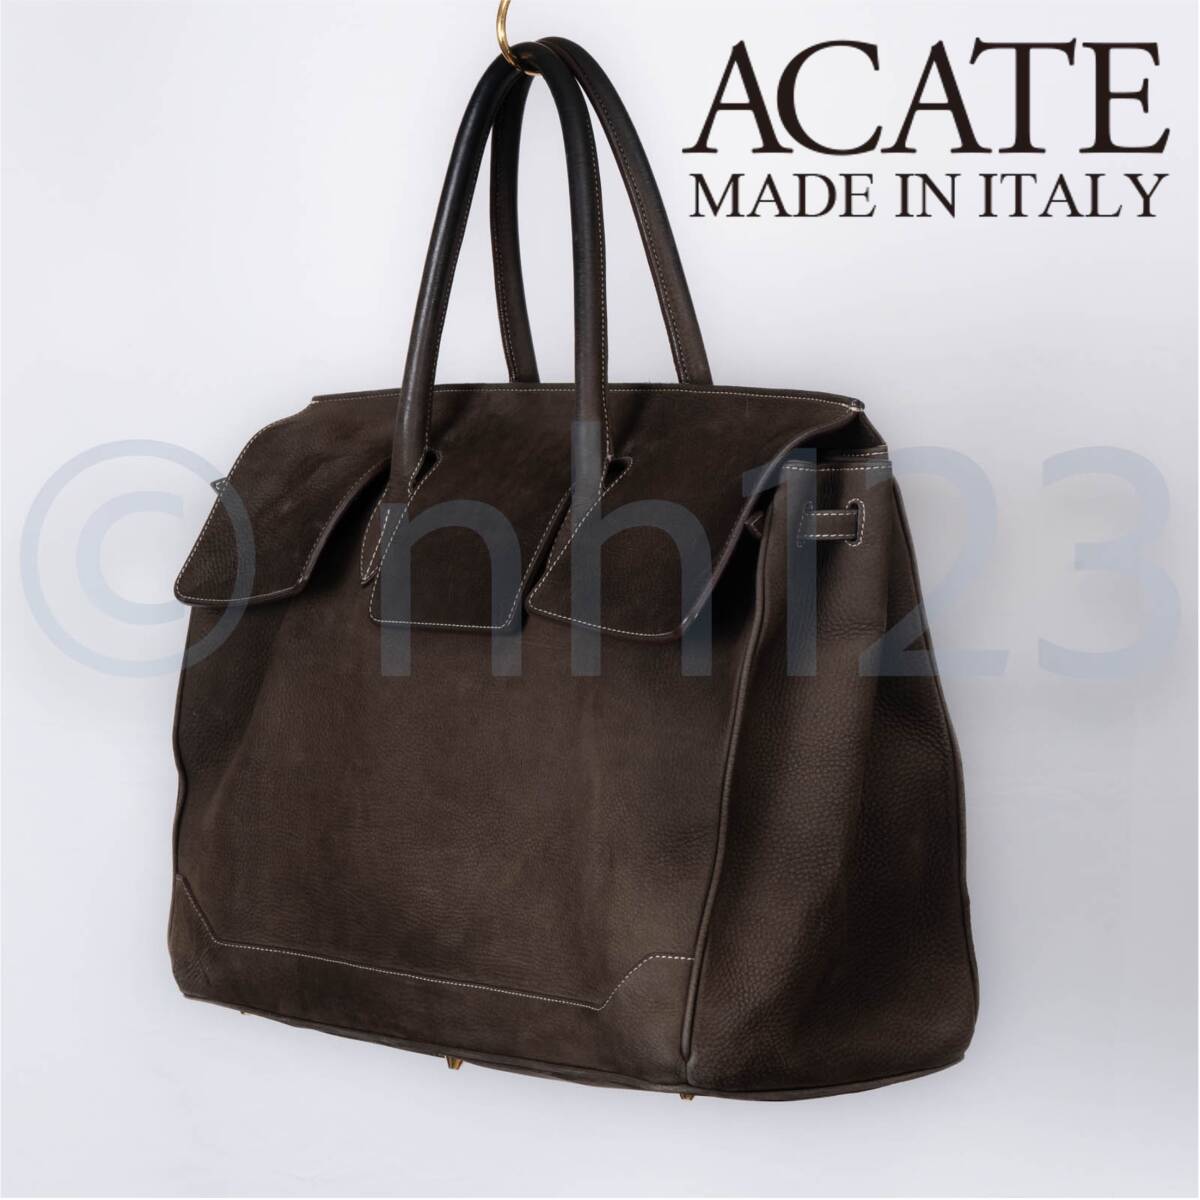 Acate Ostro tote bag Boston bag n back leather bag original leather a car teCHAMBORD SELLIER CISEI SERAPIAN large . made bag who looks for .